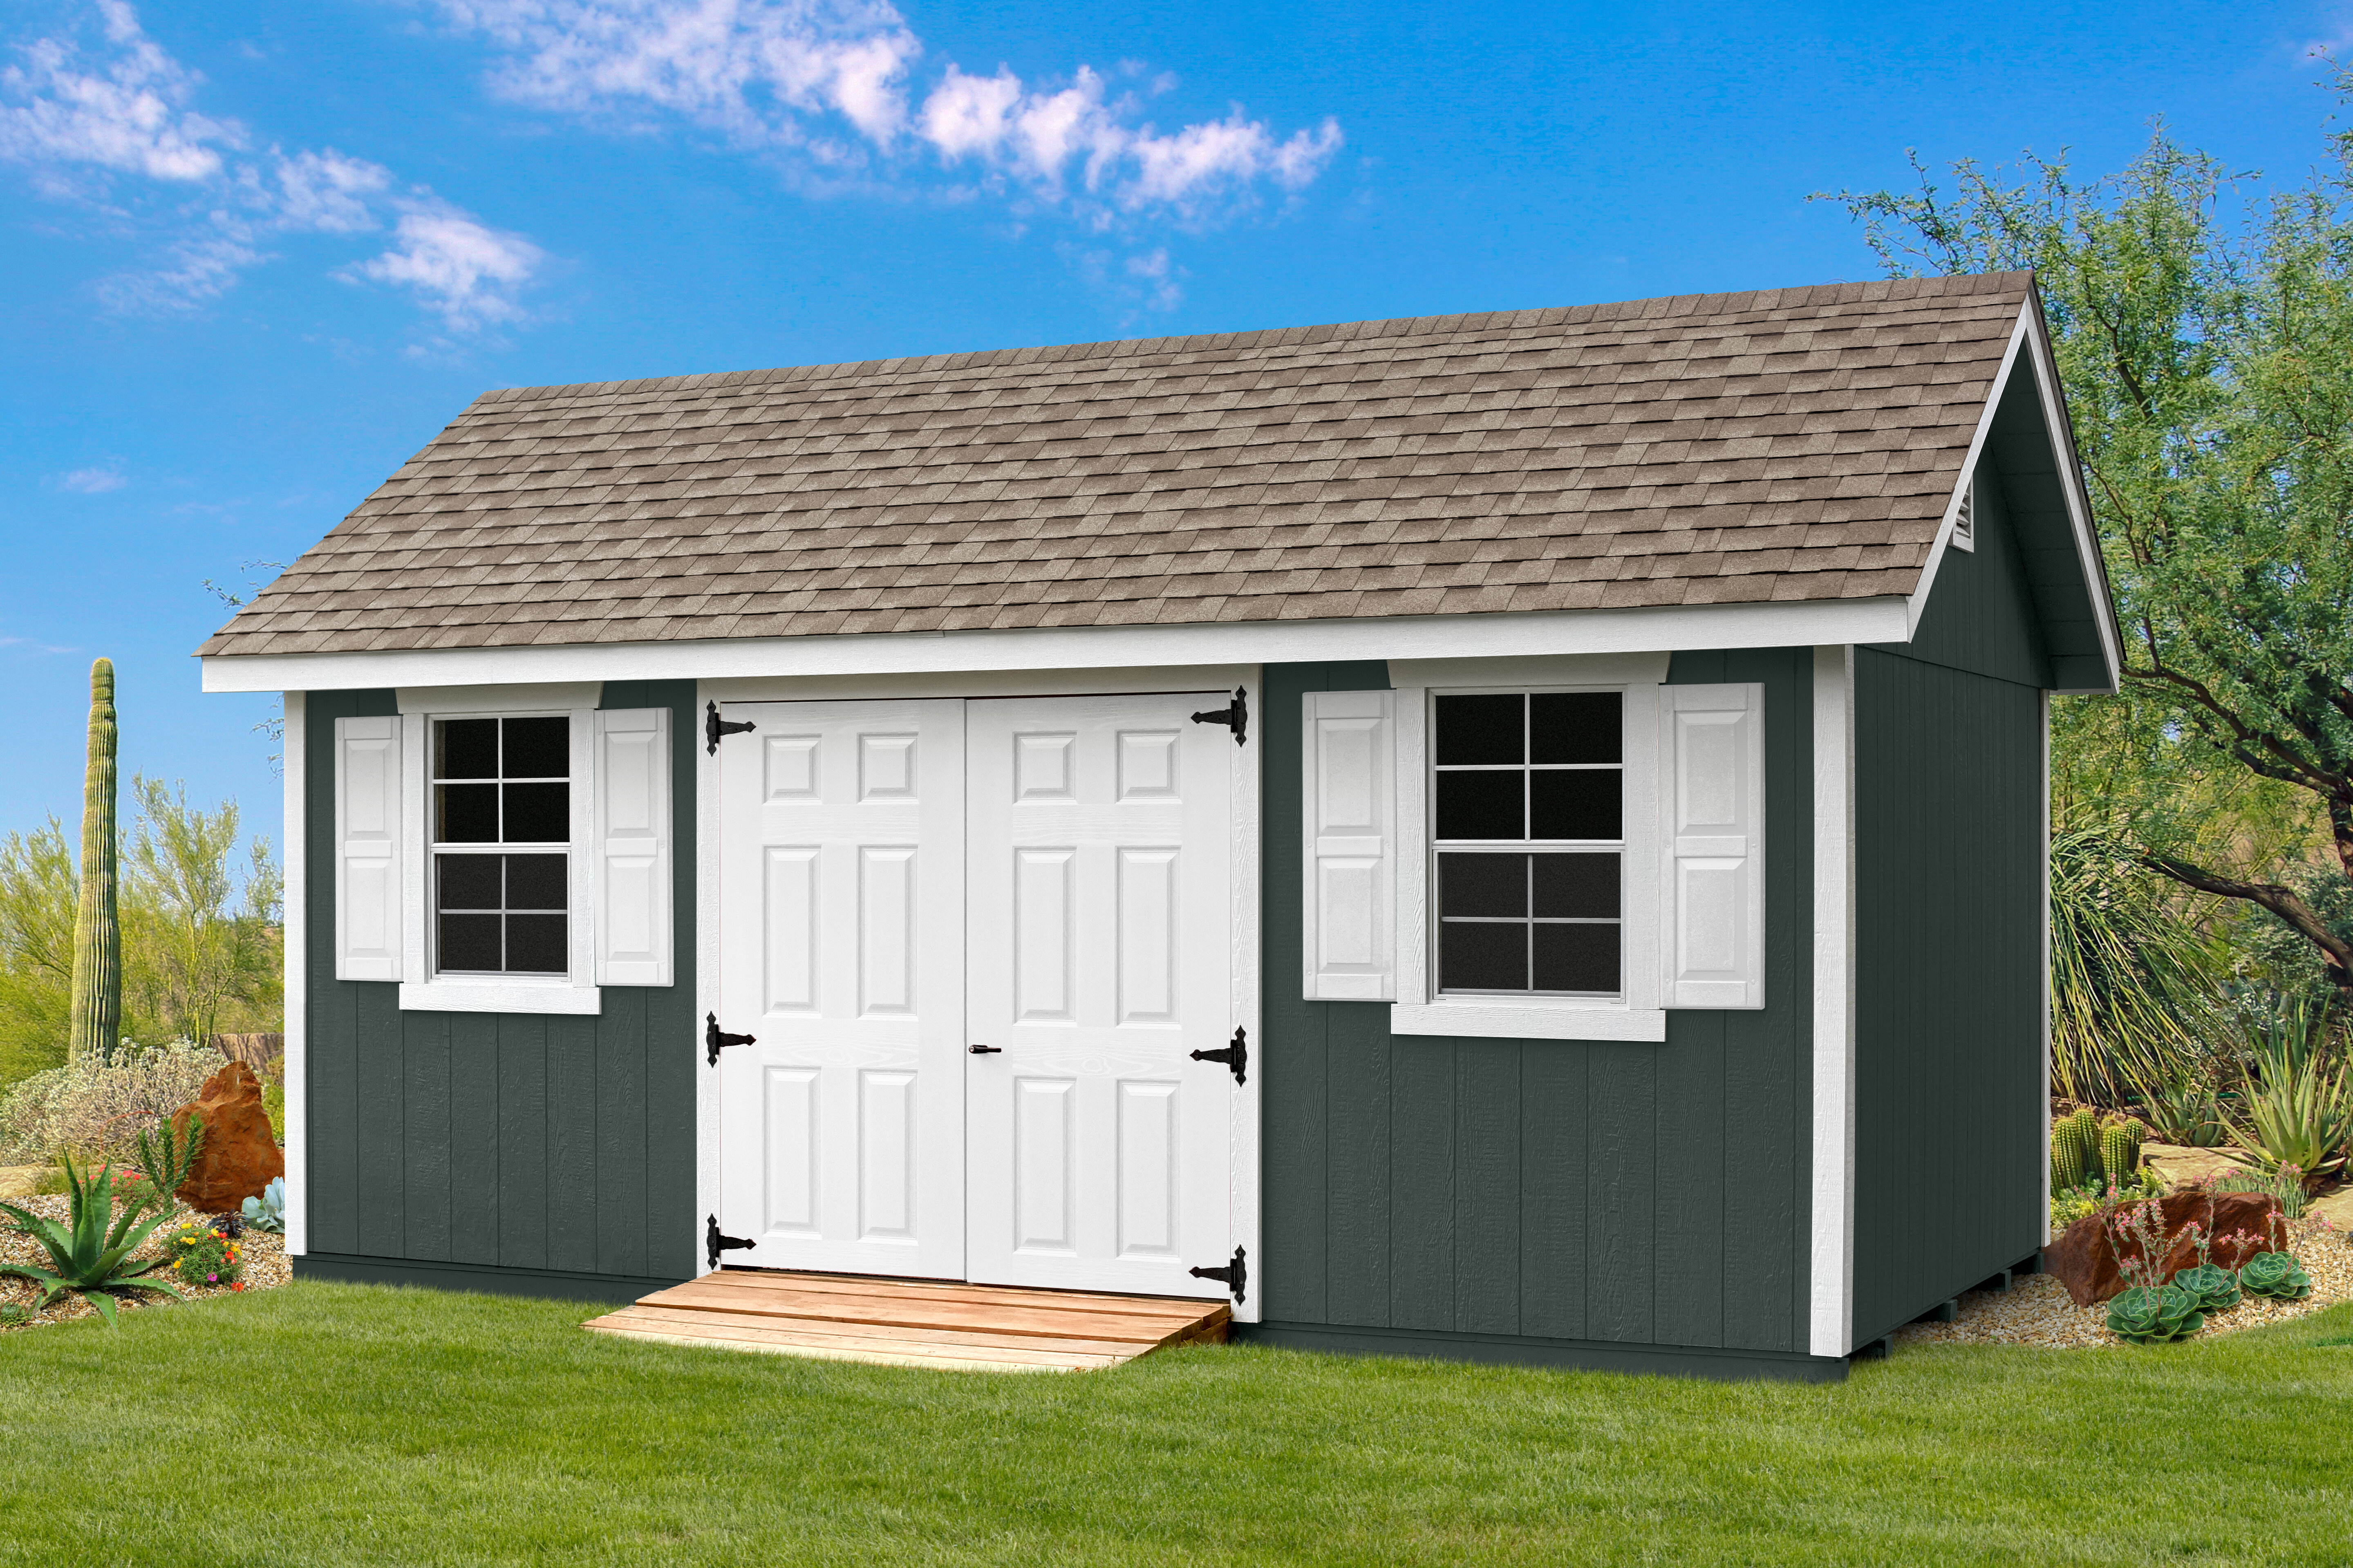 Yardcraft 10 Ft W X 18 Ft D Manufactured Wood Storage Shed Reviews Wayfair